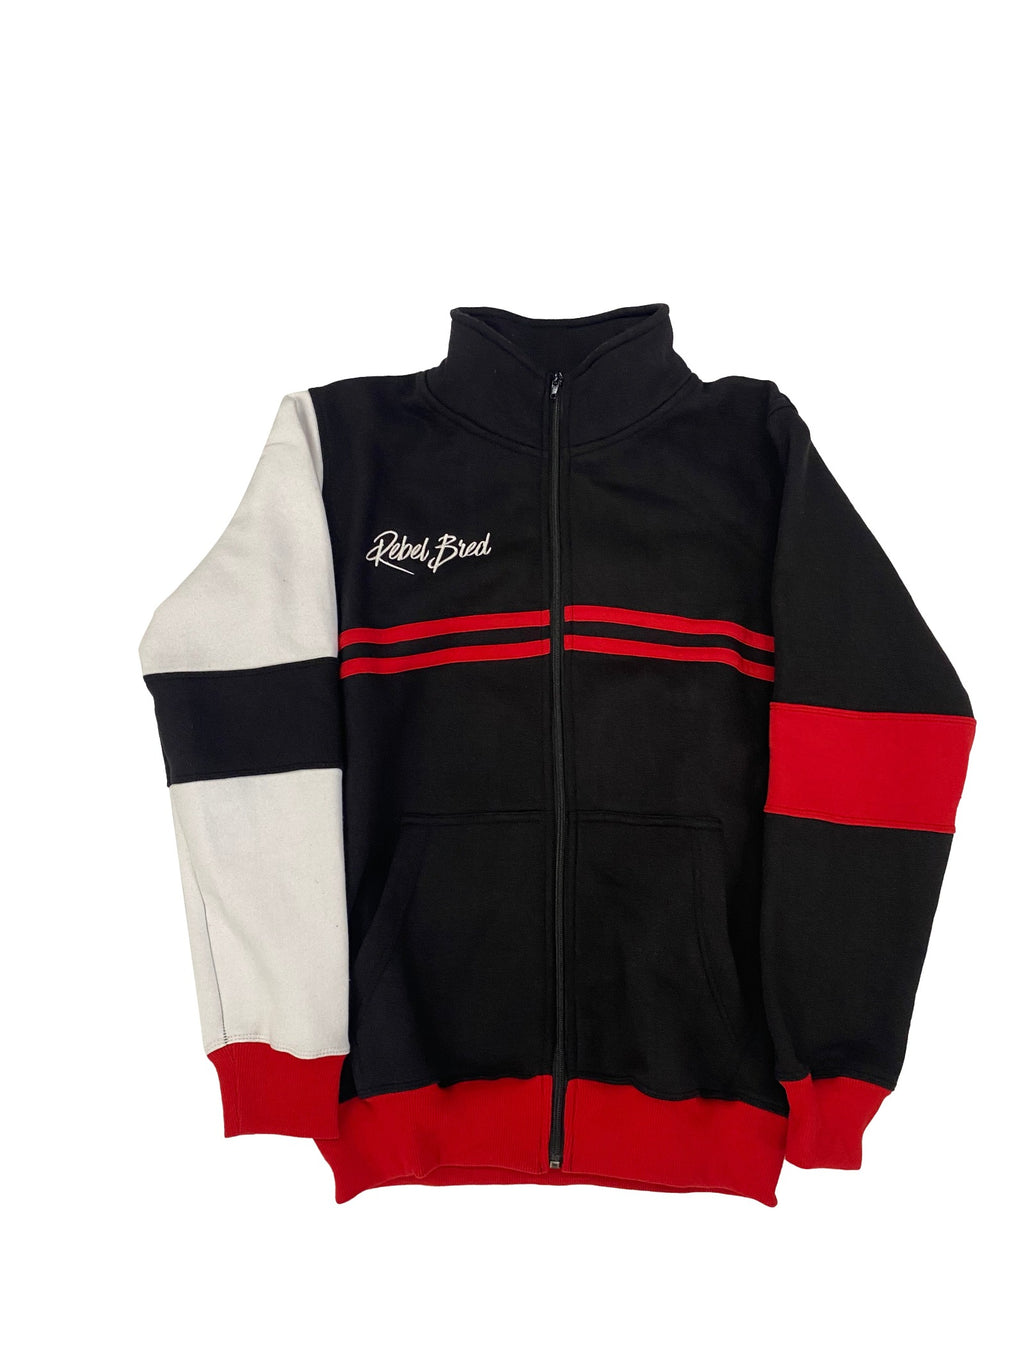 Athletic track jacket with color block and embroidery